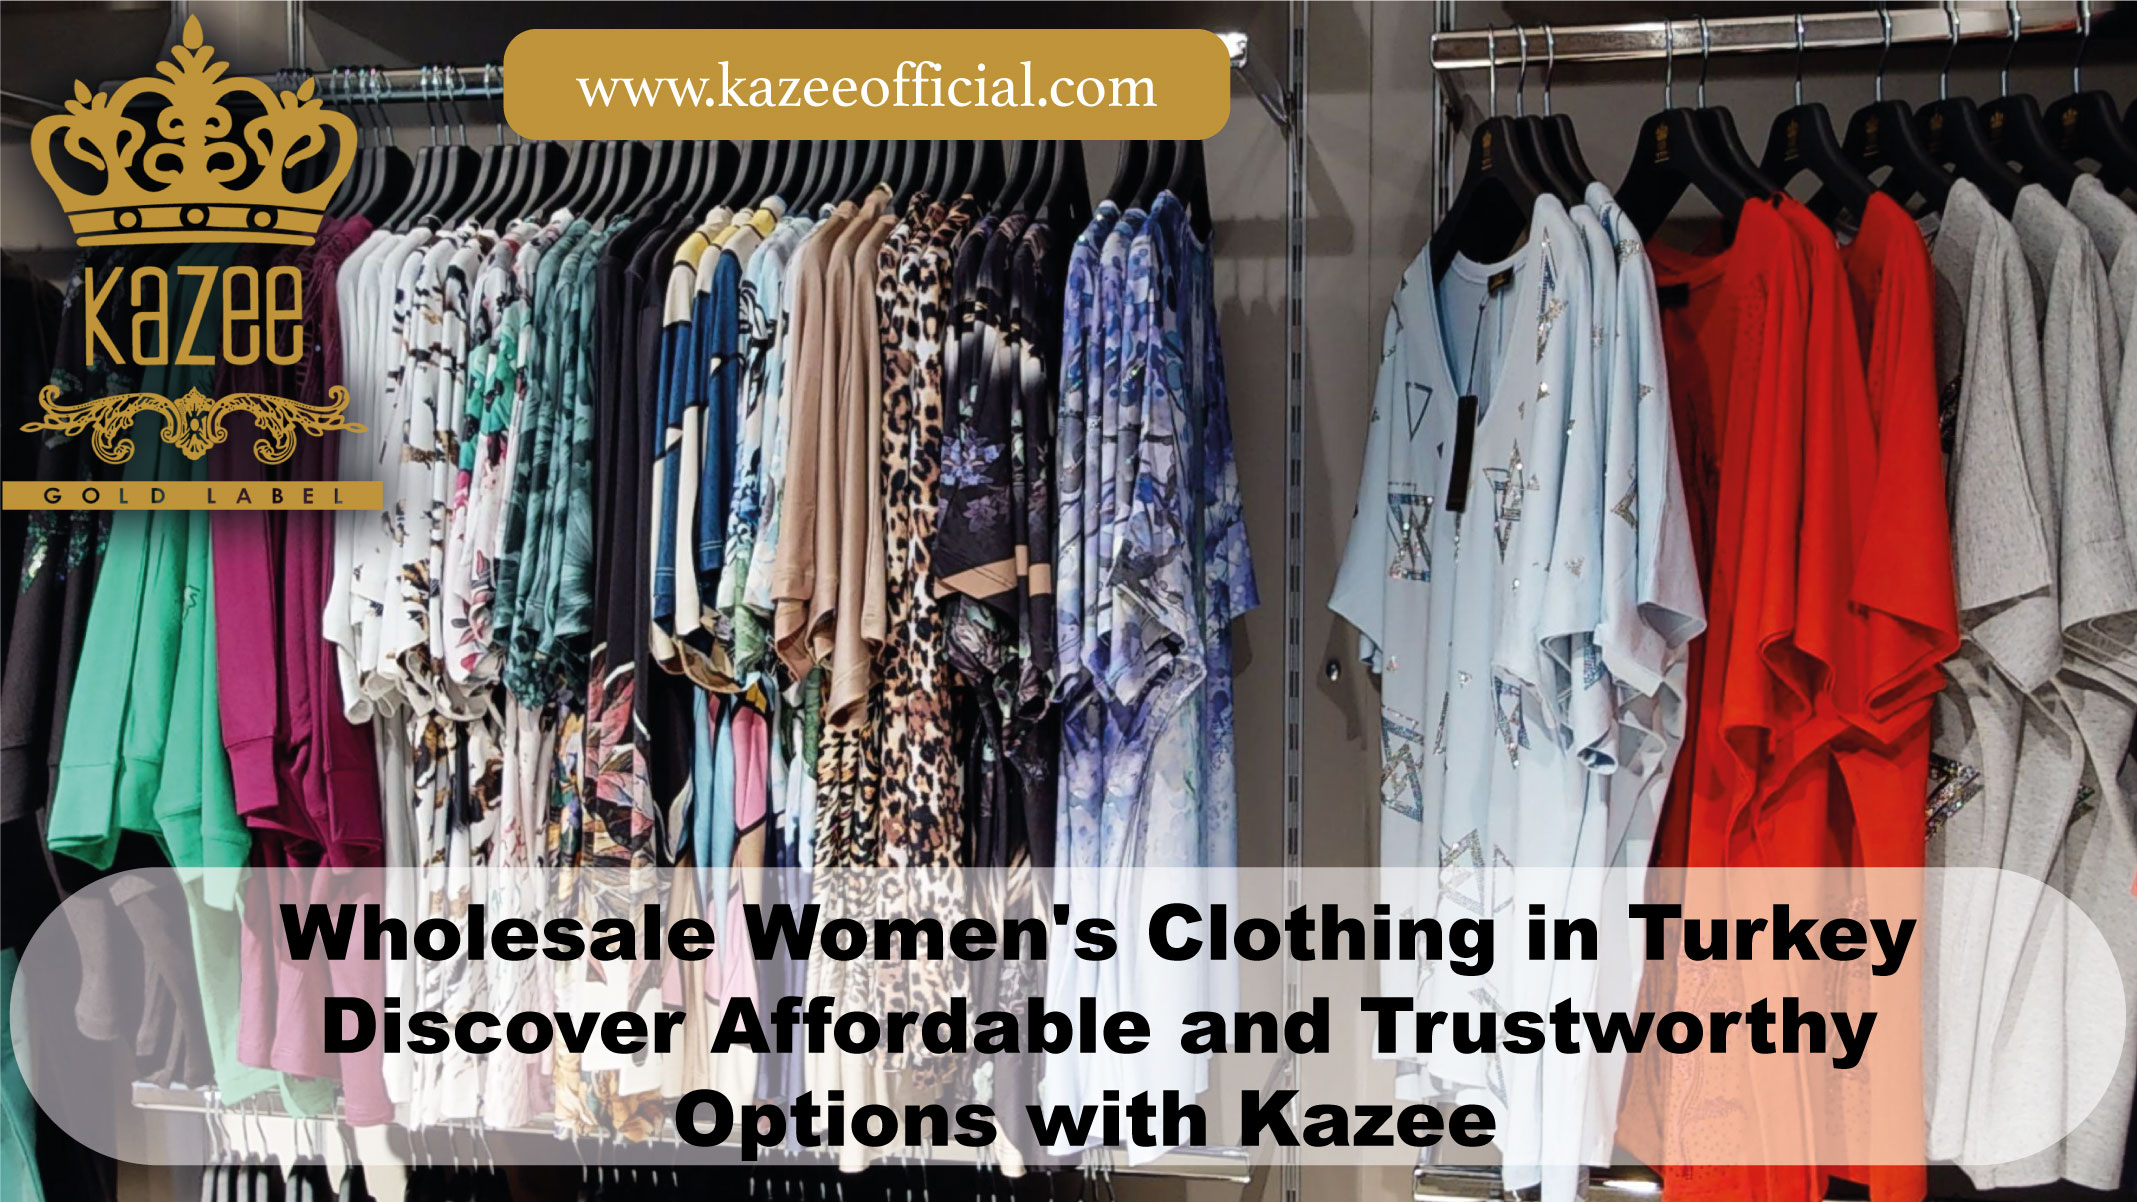 Wholesale Women's Clothing in Turkey: Discover Affordable and Trustworthy Options with Kazee